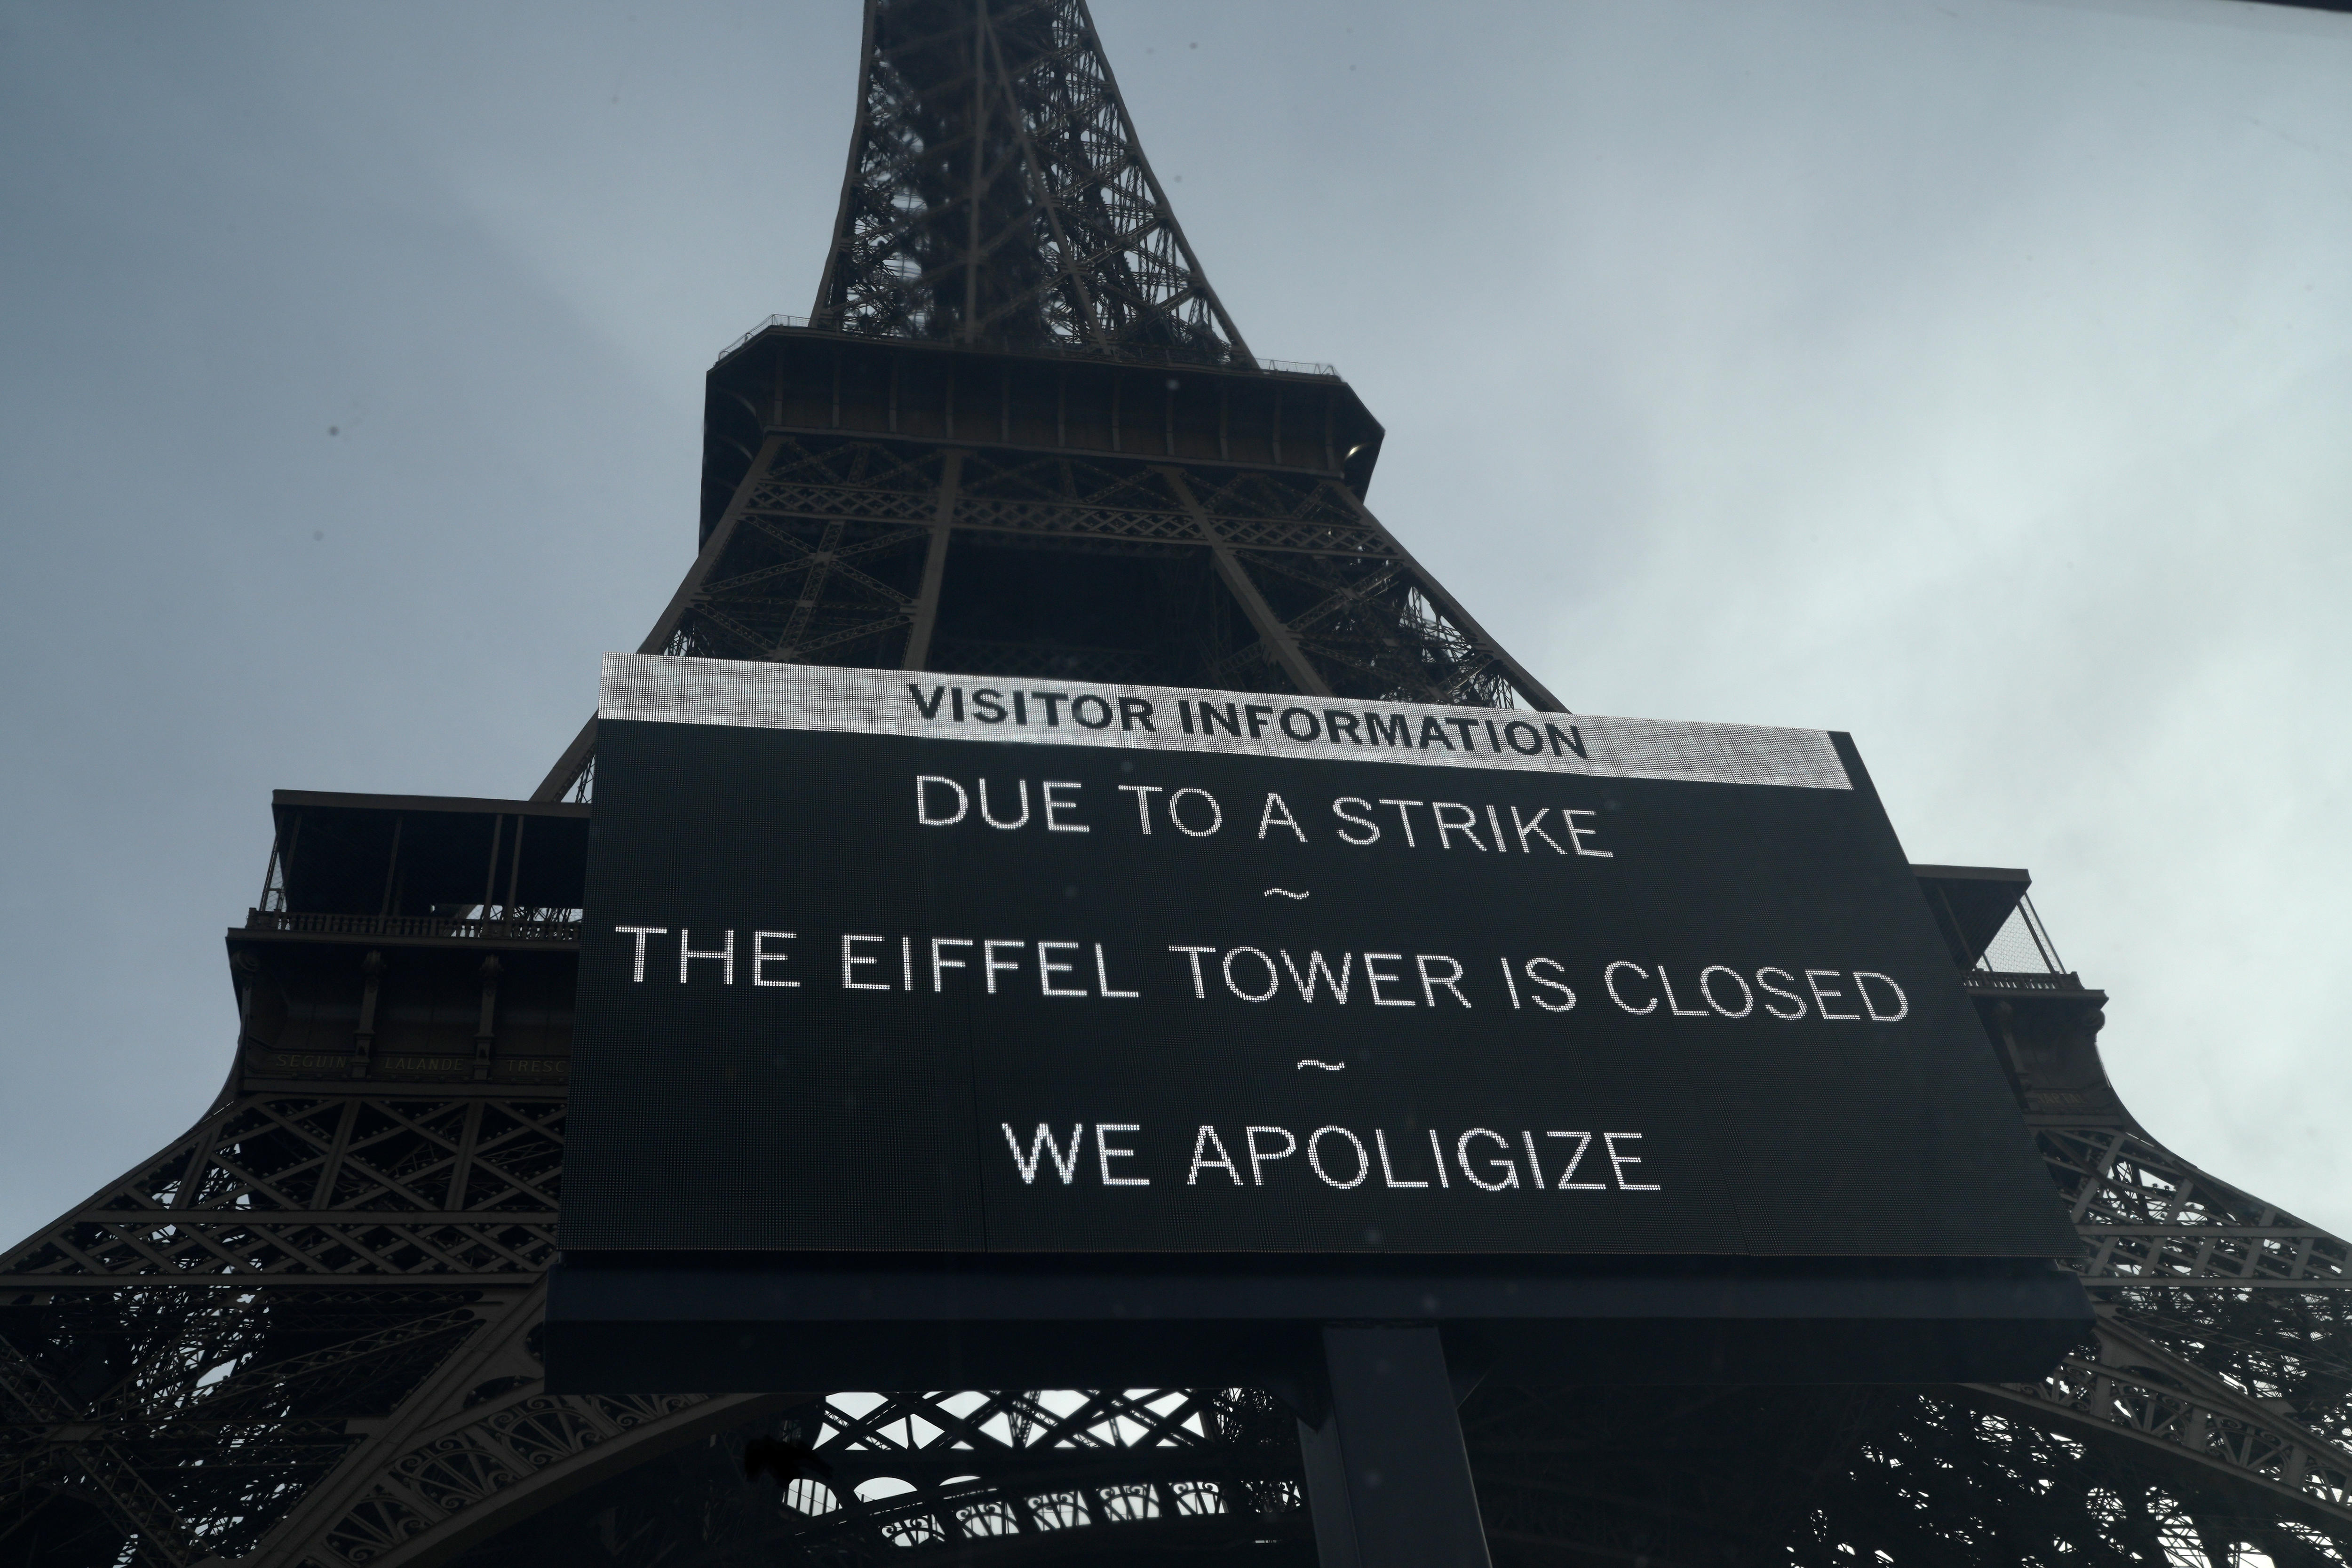 A board in front of the Eiffel Tower warns about a strike. "Due to a strike, the Eiffel Tower is closed. We spologize," it says.